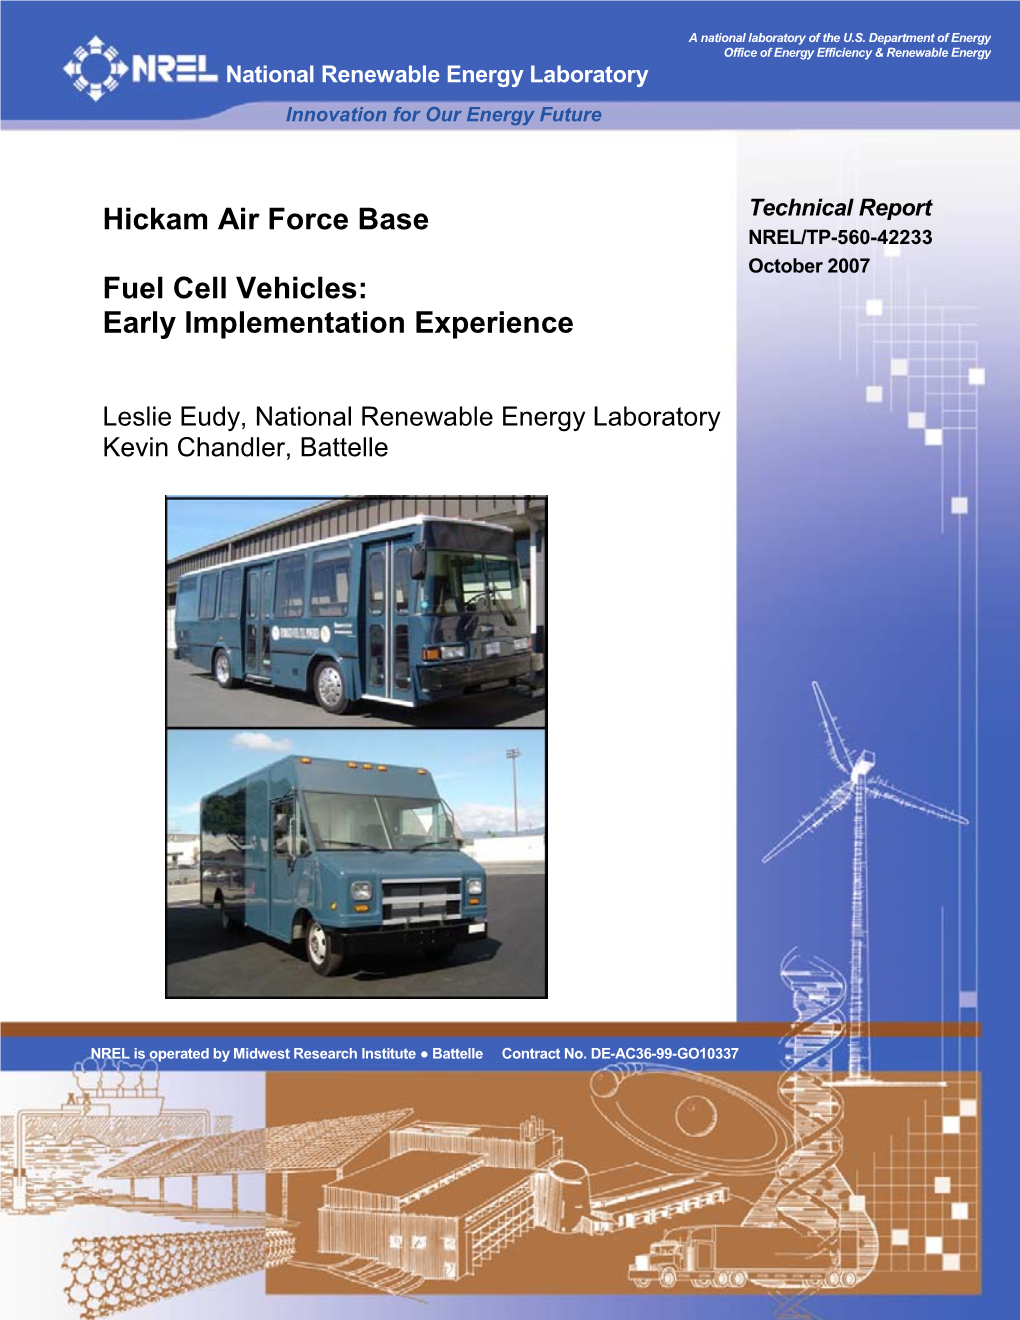 Hickam Air Force Base Fuel Cell Vehicles: Early Implementation DE-AC36-99-GO10337 Experience 5B